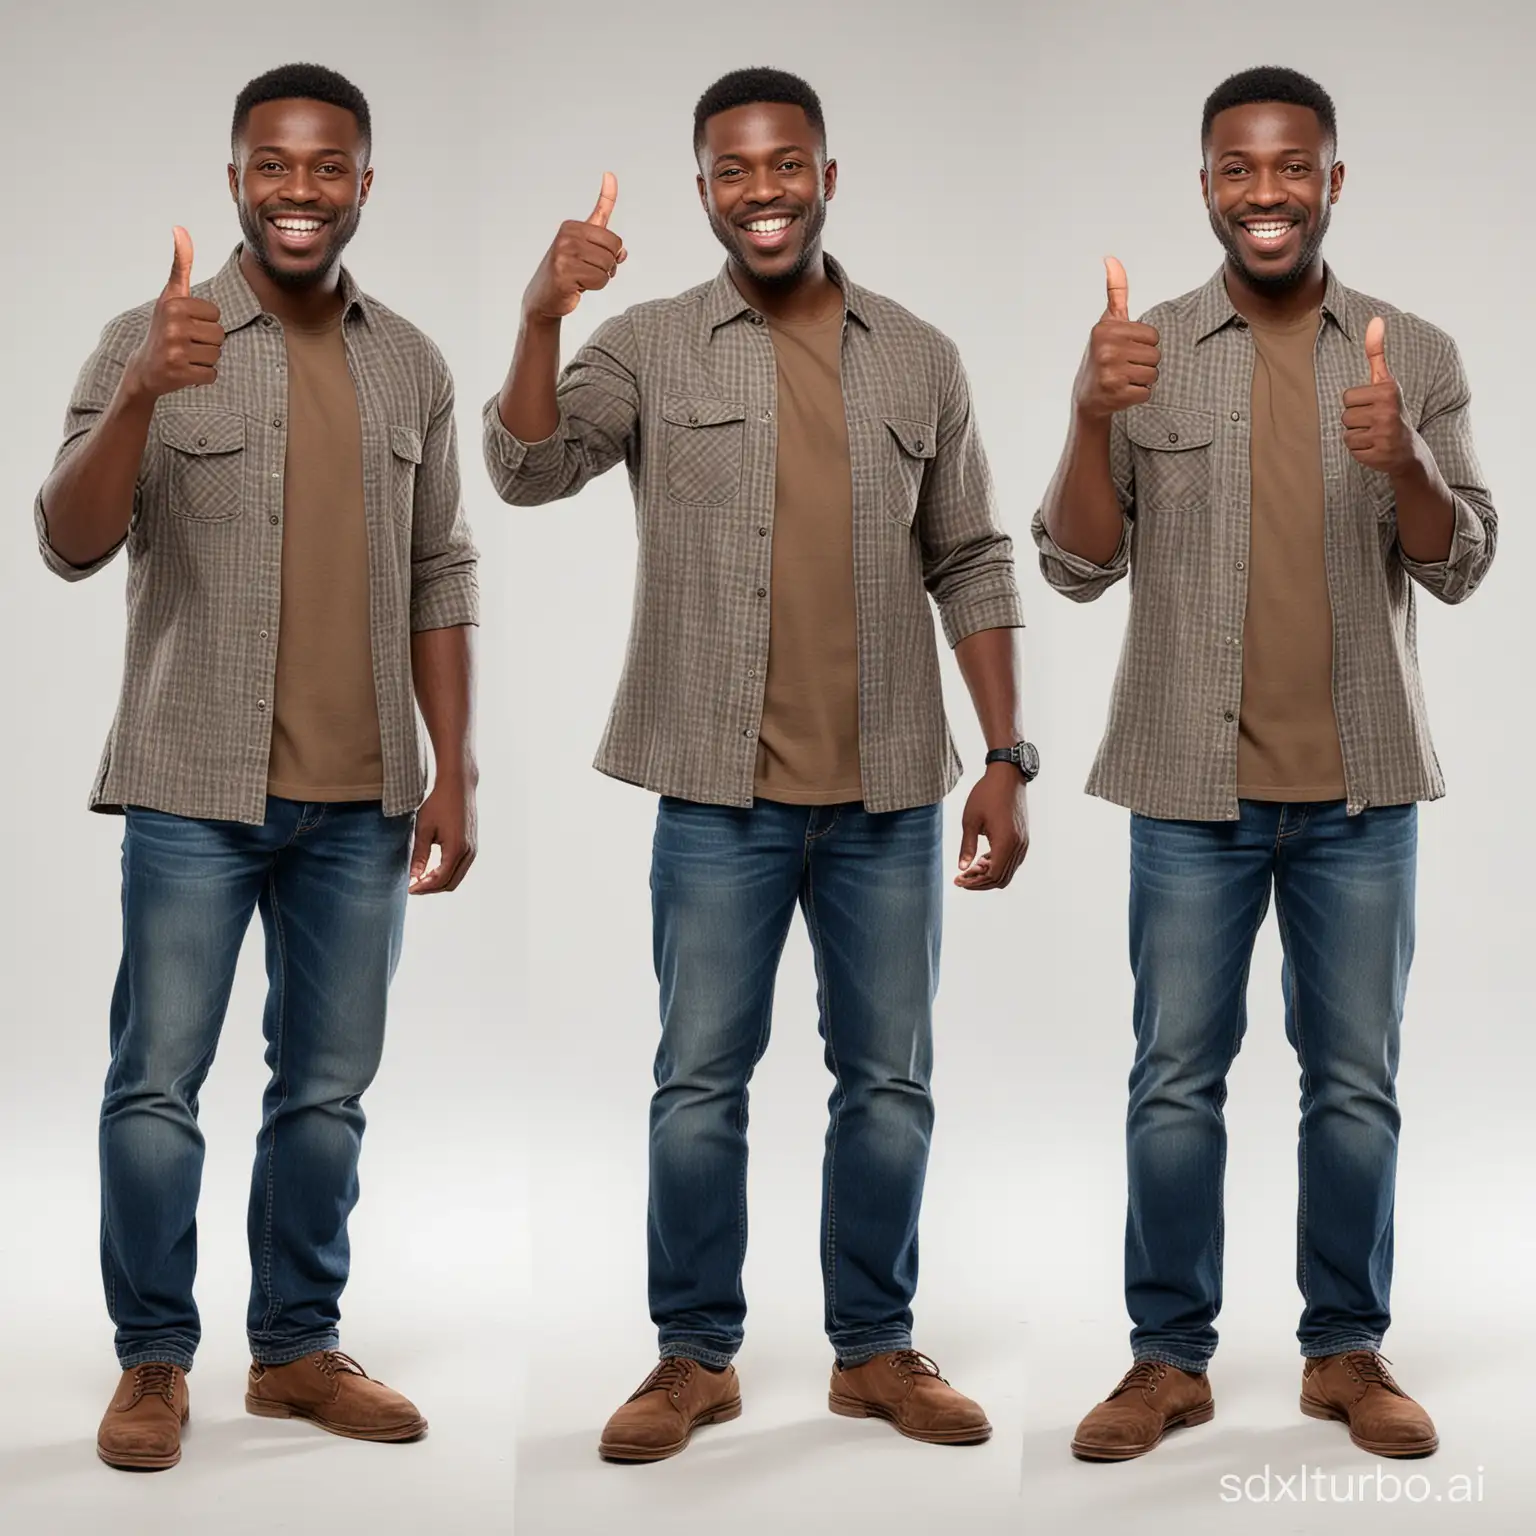 Generate two Nigerian Black men, different face,different cloths,aged between 30 to 40, standing upright and each raising a thumbs-up gesture, portrayed in full-body authentic photographs in PNG format with a transparent background."